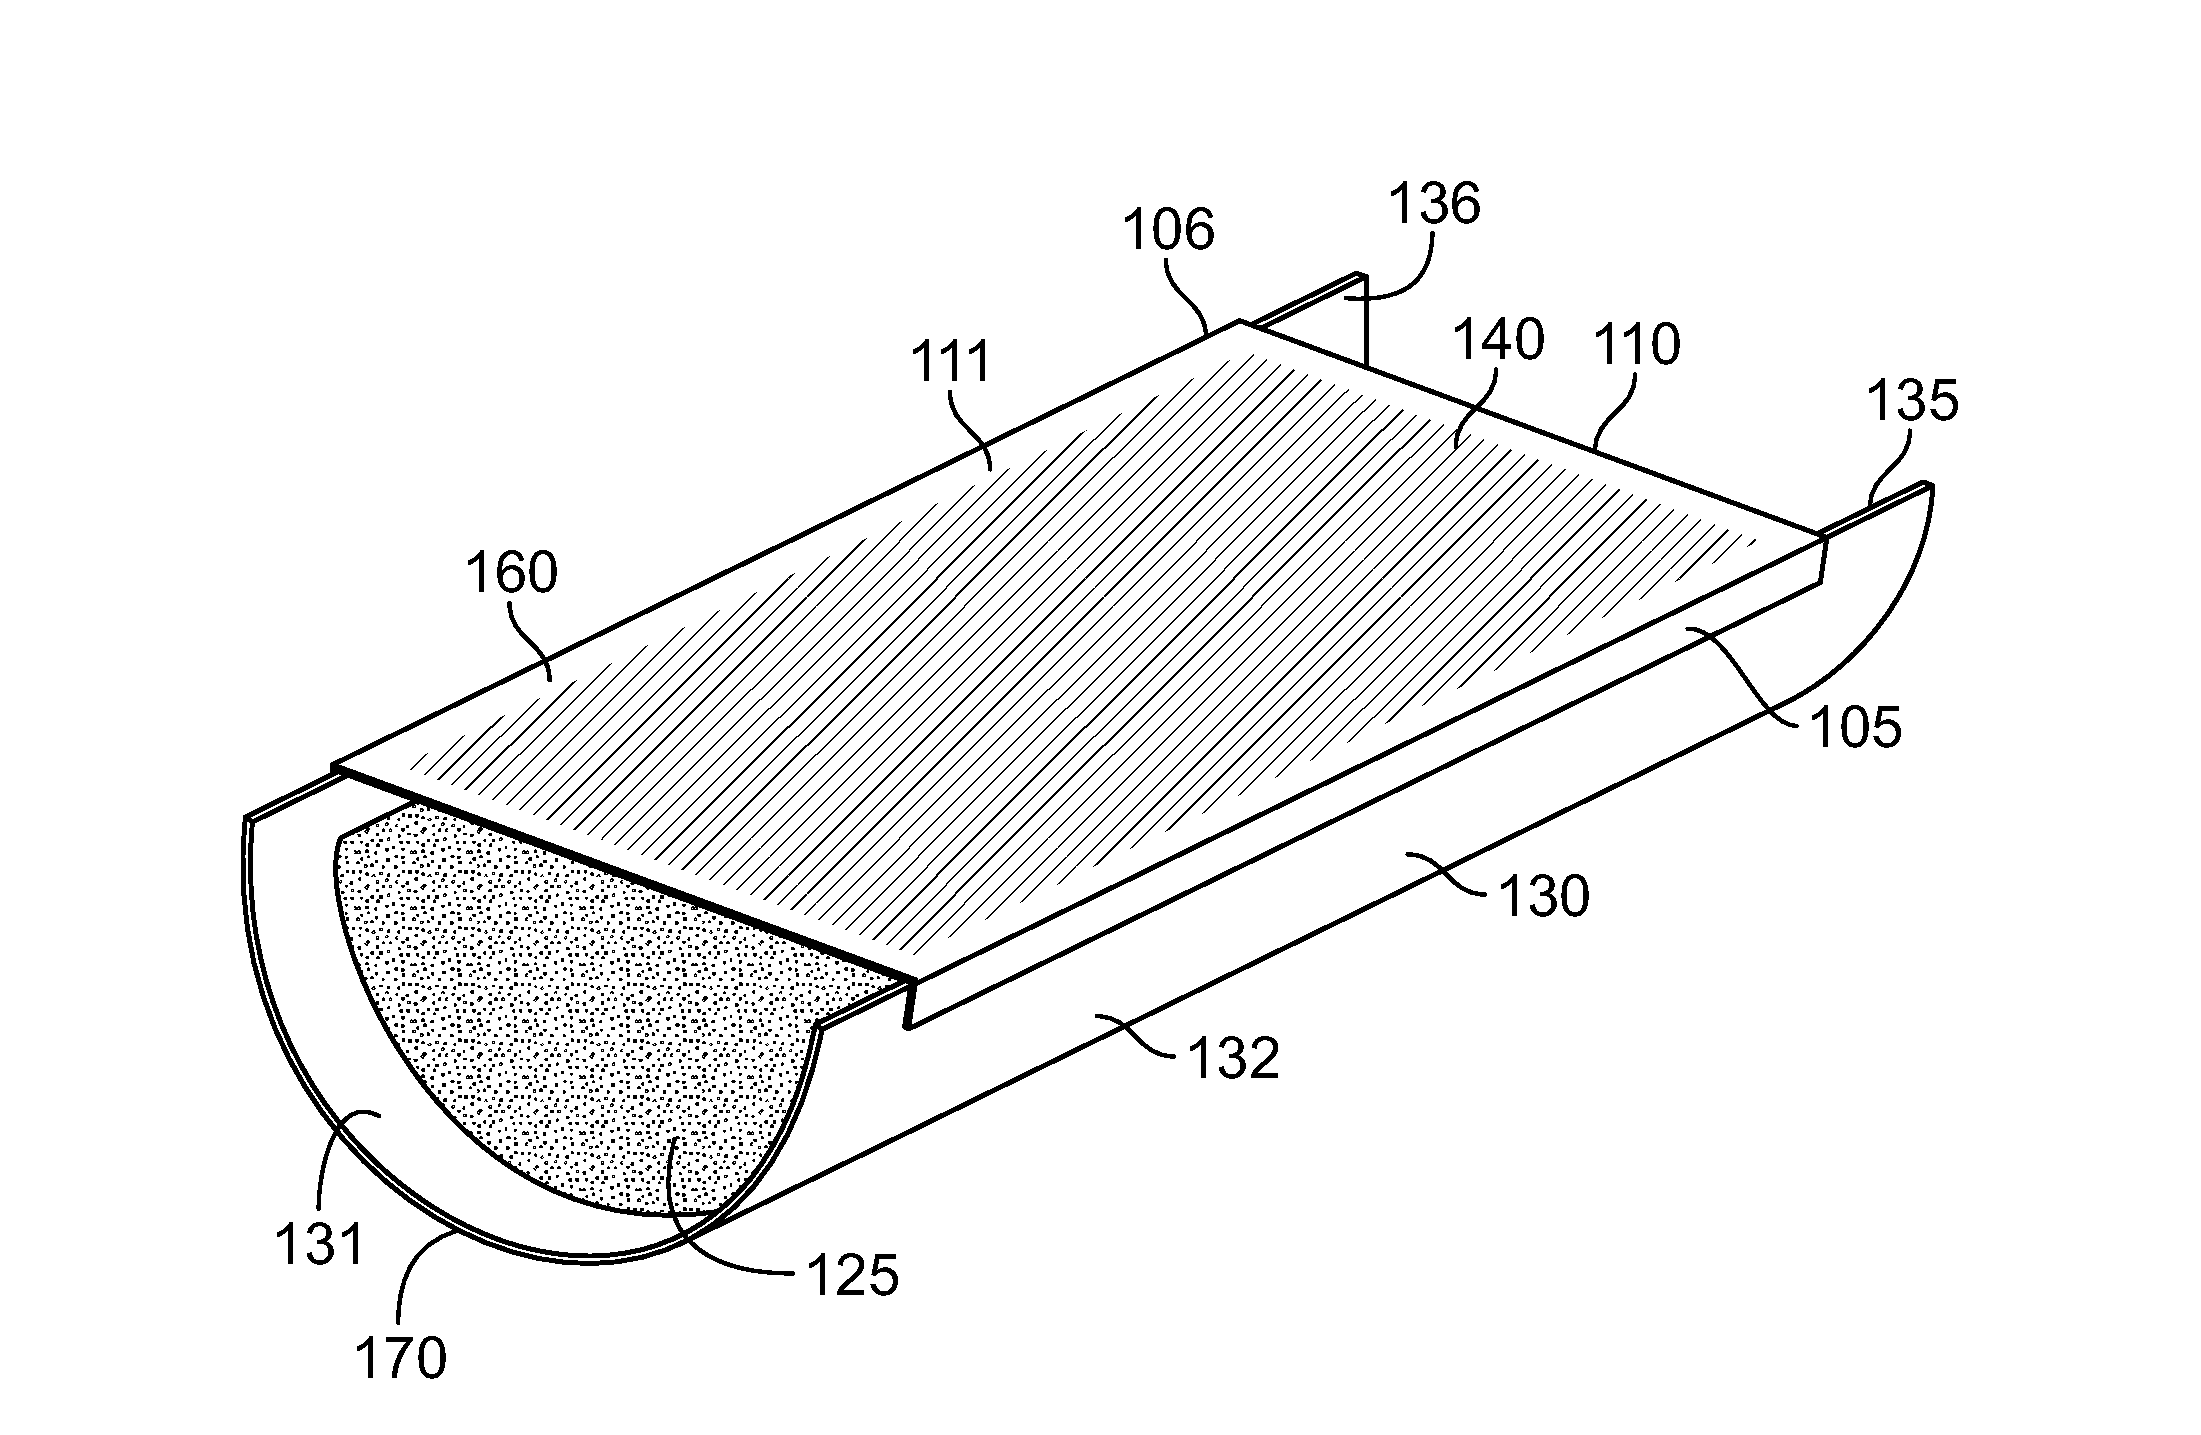 Strained skin treatment devices and methods